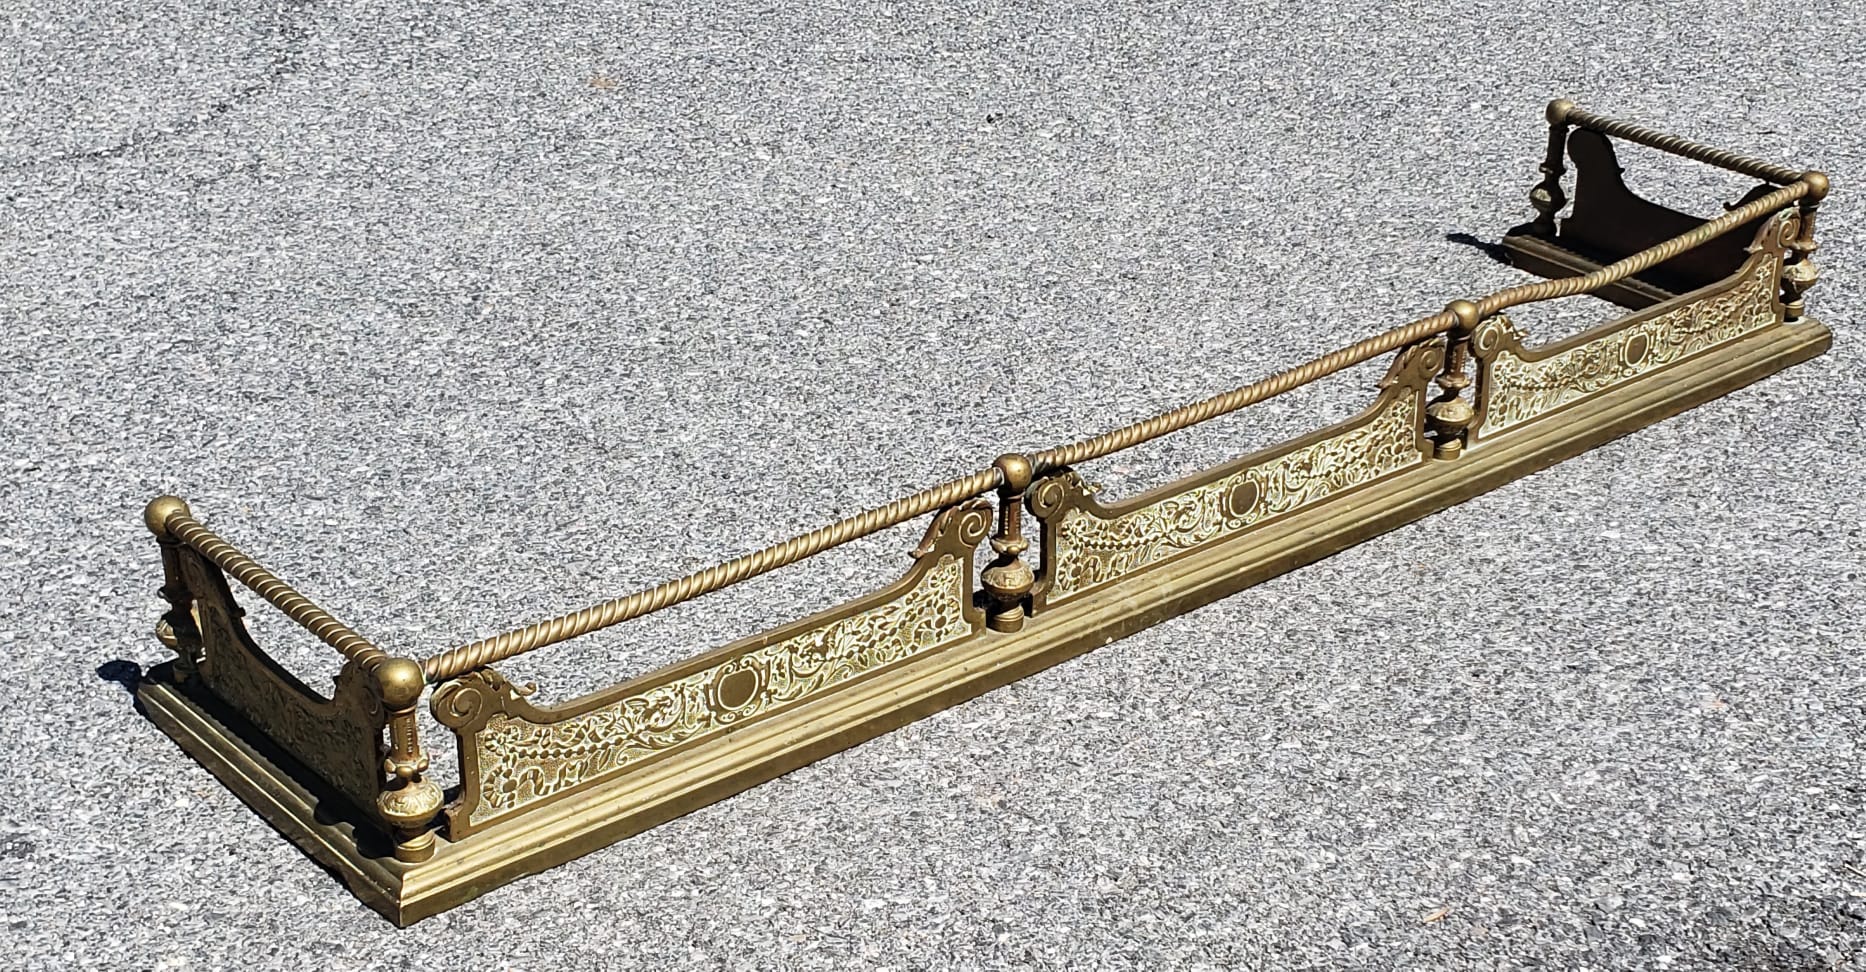 A 19th Century Louis XVI Cast Brass and Iron Ornate Fireplace Fender .
Measures 60